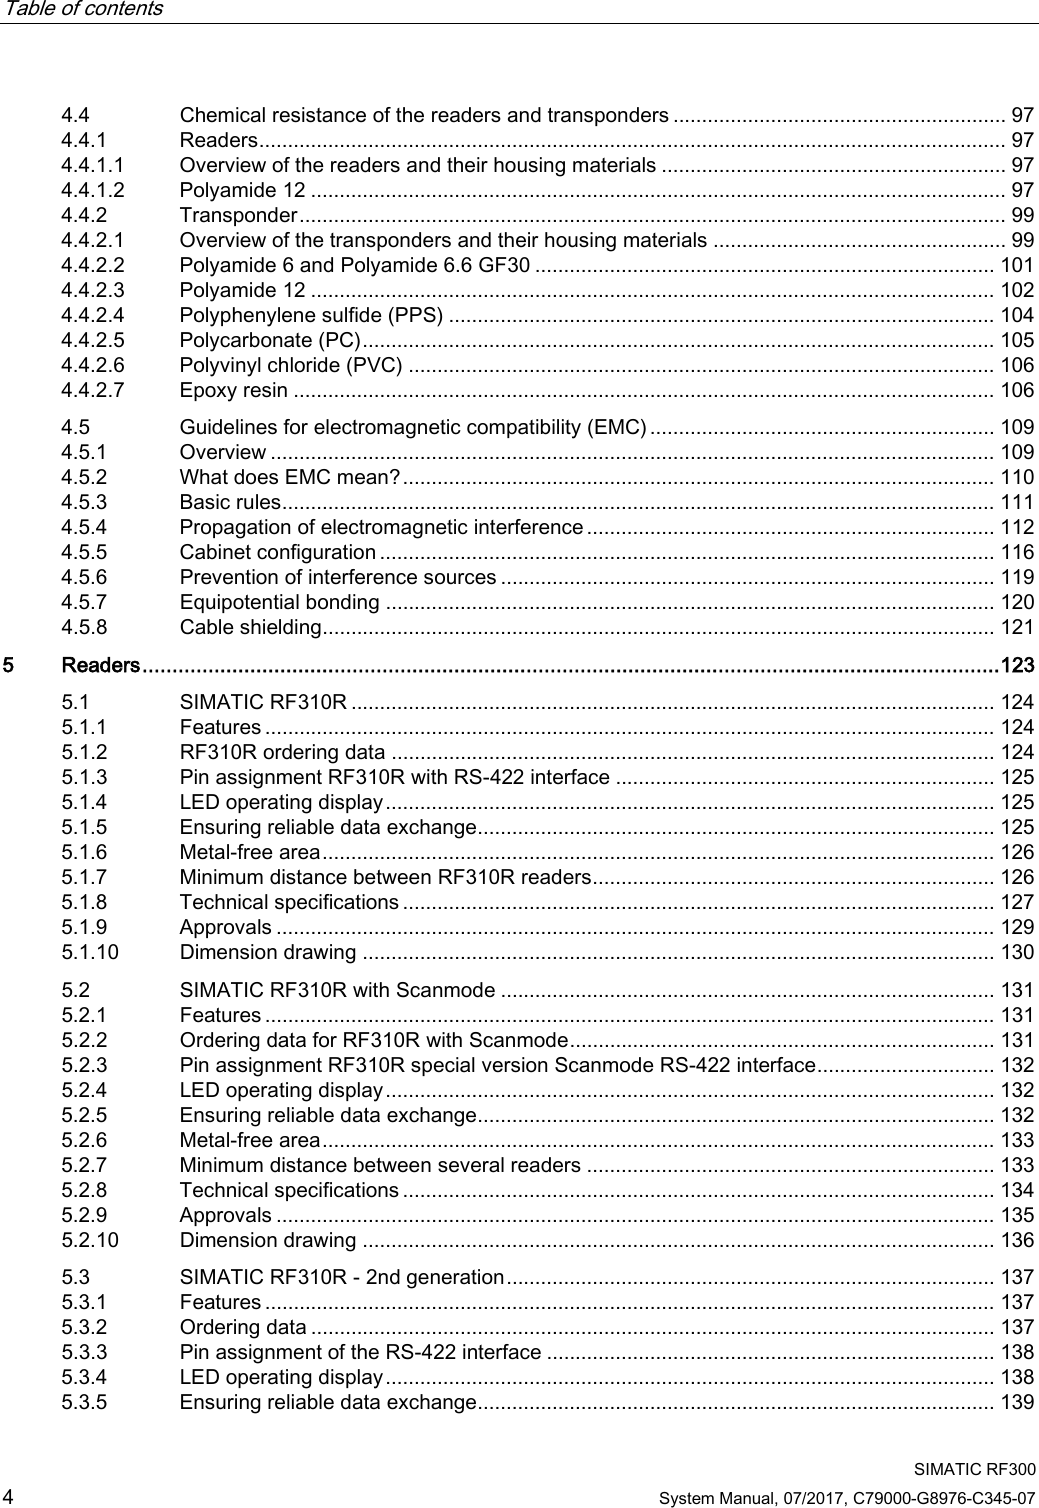 Table of contents     SIMATIC RF300 4 System Manual, 07/2017, C79000-G8976-C345-07 4.4 Chemical resistance of the readers and transponders .......................................................... 97 4.4.1 Readers .................................................................................................................................. 97 4.4.1.1 Overview of the readers and their housing materials ............................................................ 97 4.4.1.2 Polyamide 12 ......................................................................................................................... 97 4.4.2 Transponder ........................................................................................................................... 99 4.4.2.1 Overview of the transponders and their housing materials ................................................... 99 4.4.2.2 Polyamide 6 and Polyamide 6.6 GF30 ................................................................................ 101 4.4.2.3 Polyamide 12 ....................................................................................................................... 102 4.4.2.4 Polyphenylene sulfide (PPS) ............................................................................................... 104 4.4.2.5 Polycarbonate (PC) .............................................................................................................. 105 4.4.2.6 Polyvinyl chloride (PVC) ...................................................................................................... 106 4.4.2.7 Epoxy resin .......................................................................................................................... 106 4.5 Guidelines for electromagnetic compatibility (EMC) ............................................................ 109 4.5.1 Overview .............................................................................................................................. 109 4.5.2 What does EMC mean? ....................................................................................................... 110 4.5.3 Basic rules ............................................................................................................................ 111 4.5.4 Propagation of electromagnetic interference ....................................................................... 112 4.5.5 Cabinet configuration ........................................................................................................... 116 4.5.6 Prevention of interference sources ...................................................................................... 119 4.5.7 Equipotential bonding .......................................................................................................... 120 4.5.8 Cable shielding..................................................................................................................... 121 5  Readers ............................................................................................................................................... 123 5.1 SIMATIC RF310R ................................................................................................................ 124 5.1.1 Features ............................................................................................................................... 124 5.1.2 RF310R ordering data ......................................................................................................... 124 5.1.3 Pin assignment RF310R with RS-422 interface .................................................................. 125 5.1.4 LED operating display .......................................................................................................... 125 5.1.5 Ensuring reliable data exchange .......................................................................................... 125 5.1.6 Metal-free area ..................................................................................................................... 126 5.1.7 Minimum distance between RF310R readers ...................................................................... 126 5.1.8 Technical specifications ....................................................................................................... 127 5.1.9 Approvals ............................................................................................................................. 129 5.1.10 Dimension drawing .............................................................................................................. 130 5.2 SIMATIC RF310R with Scanmode ...................................................................................... 131 5.2.1 Features ............................................................................................................................... 131 5.2.2 Ordering data for RF310R with Scanmode .......................................................................... 131 5.2.3 Pin assignment RF310R special version Scanmode RS-422 interface ............................... 132 5.2.4 LED operating display .......................................................................................................... 132 5.2.5 Ensuring reliable data exchange .......................................................................................... 132 5.2.6 Metal-free area ..................................................................................................................... 133 5.2.7 Minimum distance between several readers ....................................................................... 133 5.2.8 Technical specifications ....................................................................................................... 134 5.2.9 Approvals ............................................................................................................................. 135 5.2.10 Dimension drawing .............................................................................................................. 136 5.3 SIMATIC RF310R - 2nd generation ..................................................................................... 137 5.3.1 Features ............................................................................................................................... 137 5.3.2 Ordering data ....................................................................................................................... 137 5.3.3 Pin assignment of the RS-422 interface .............................................................................. 138 5.3.4 LED operating display .......................................................................................................... 138 5.3.5 Ensuring reliable data exchange .......................................................................................... 139 